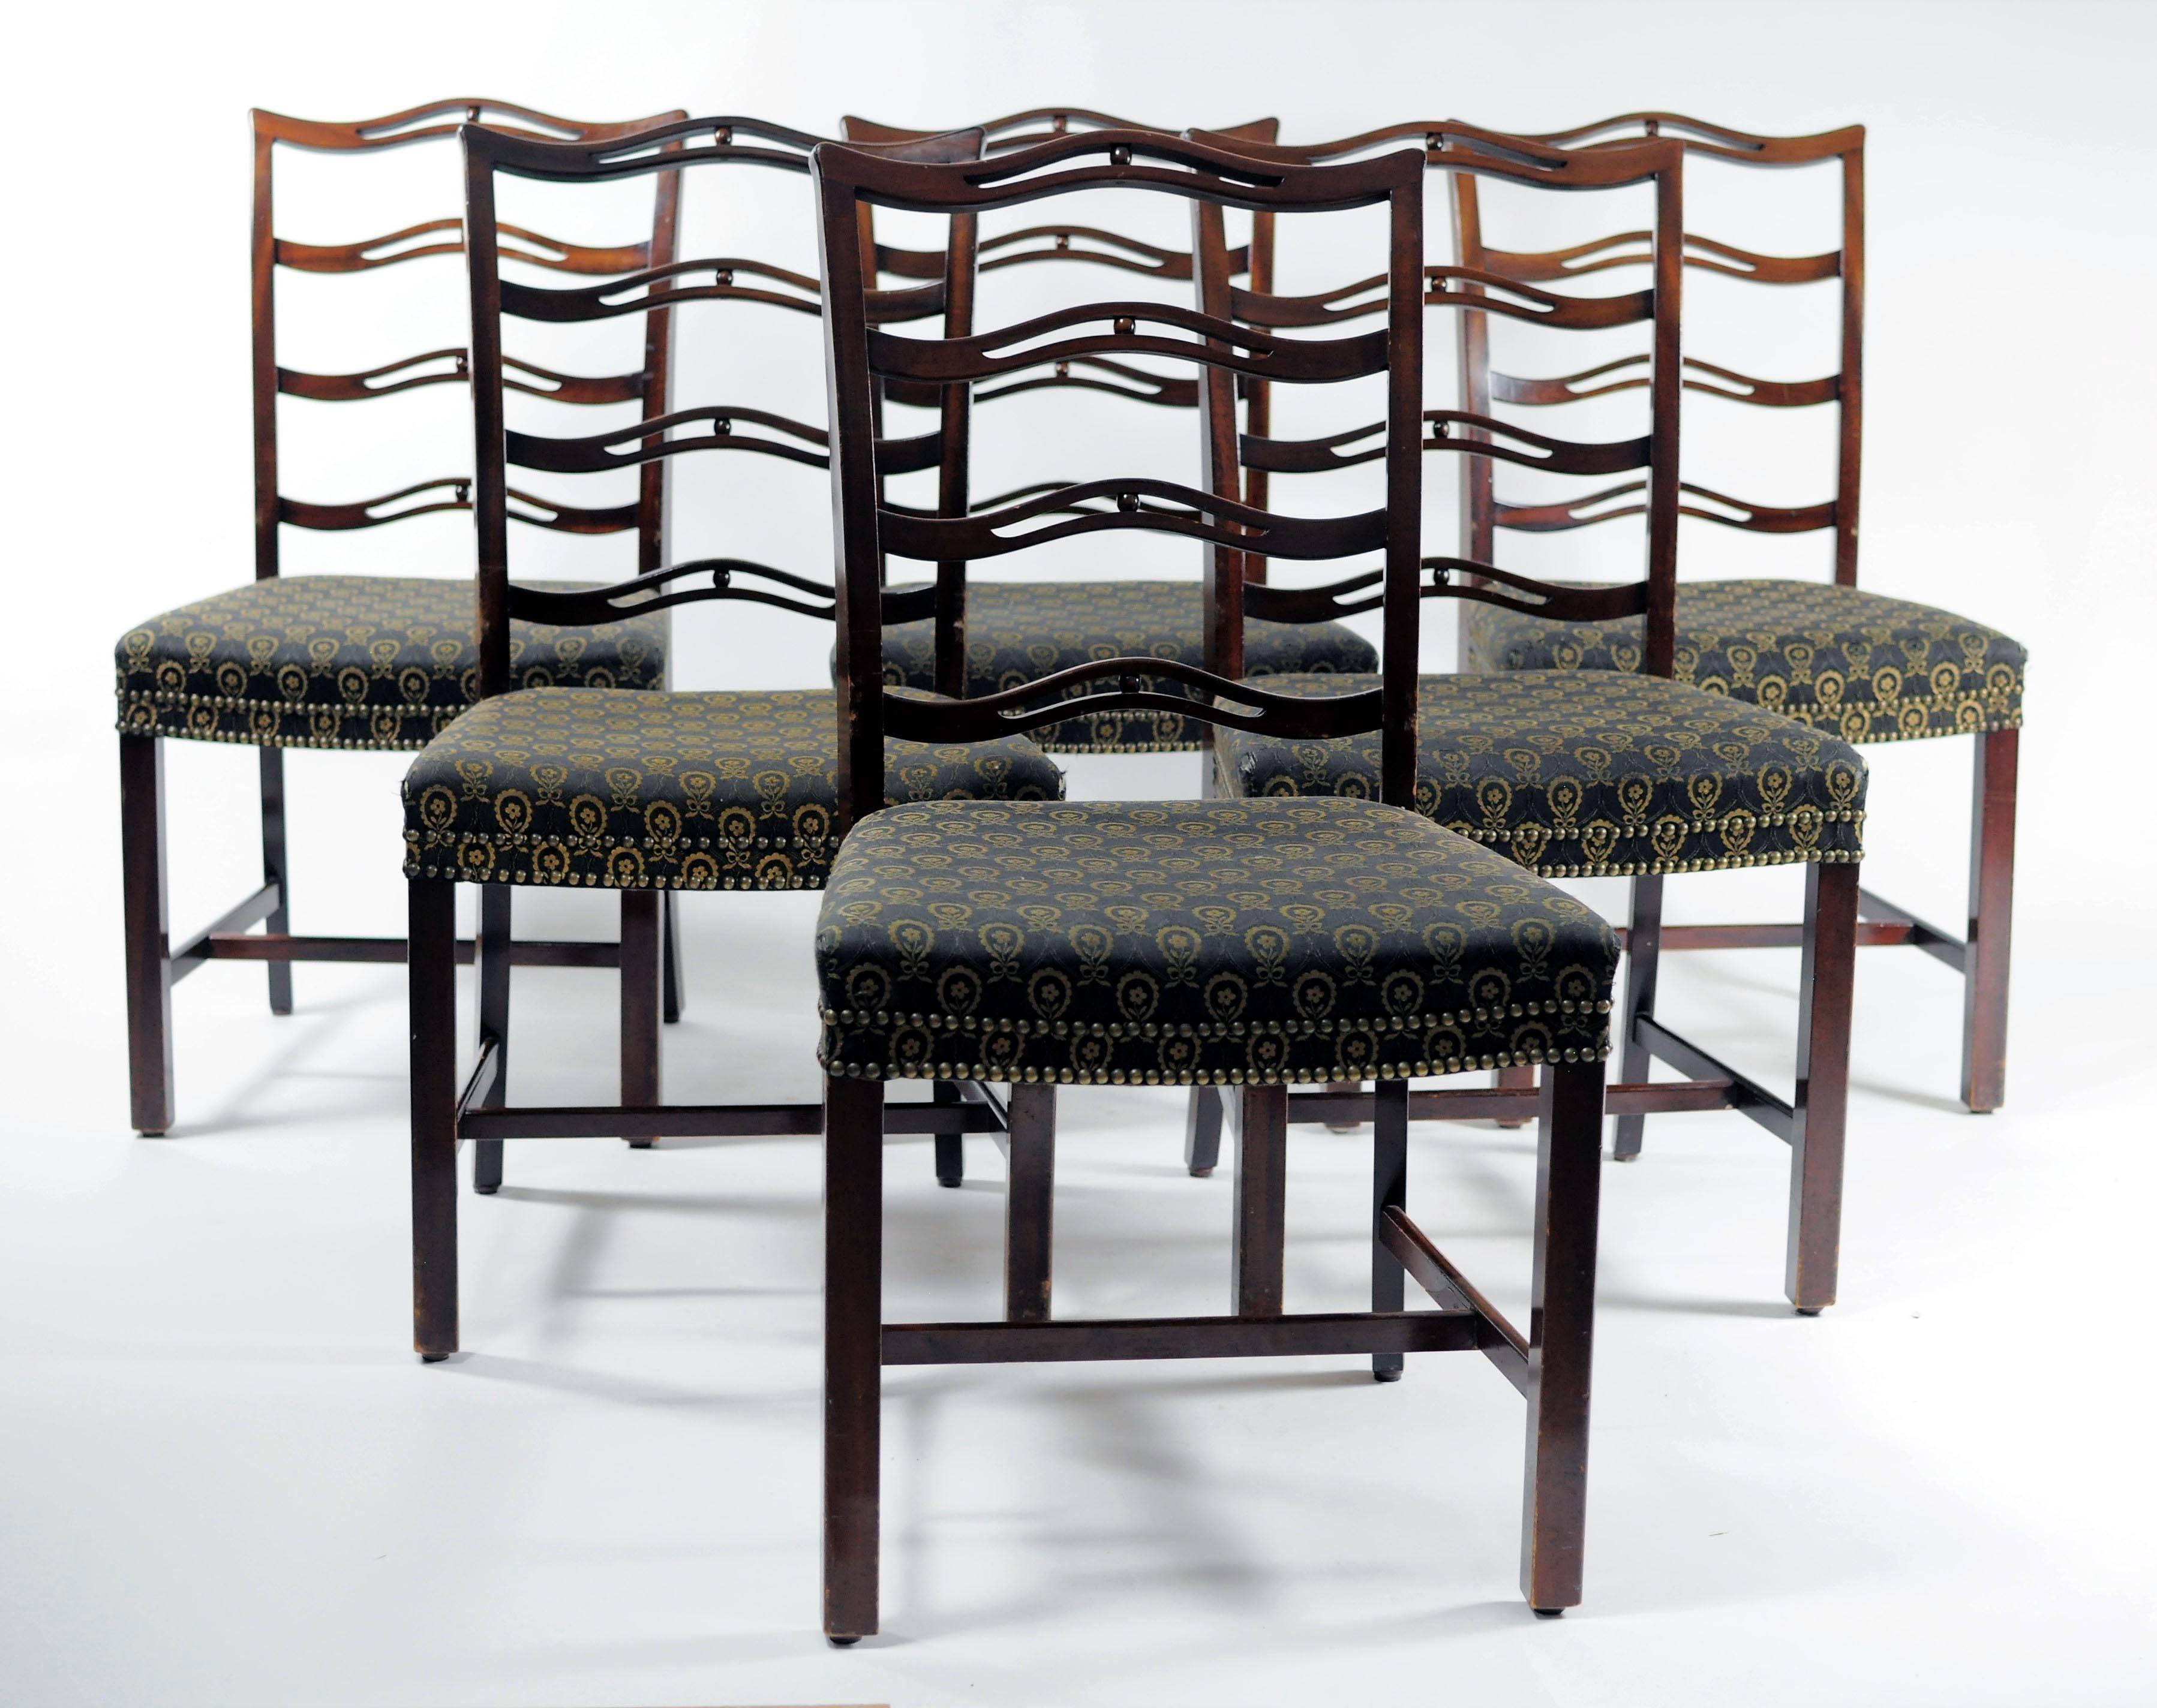 Handcrafted mahogany dining chairs by Danish master cabinetmaker Georg Kofoed in the 1930s with original beautifull fabric upholstery and labels from Georg Kofoeds workshop.

The set of dining chairs features very well crafted elegant frames and